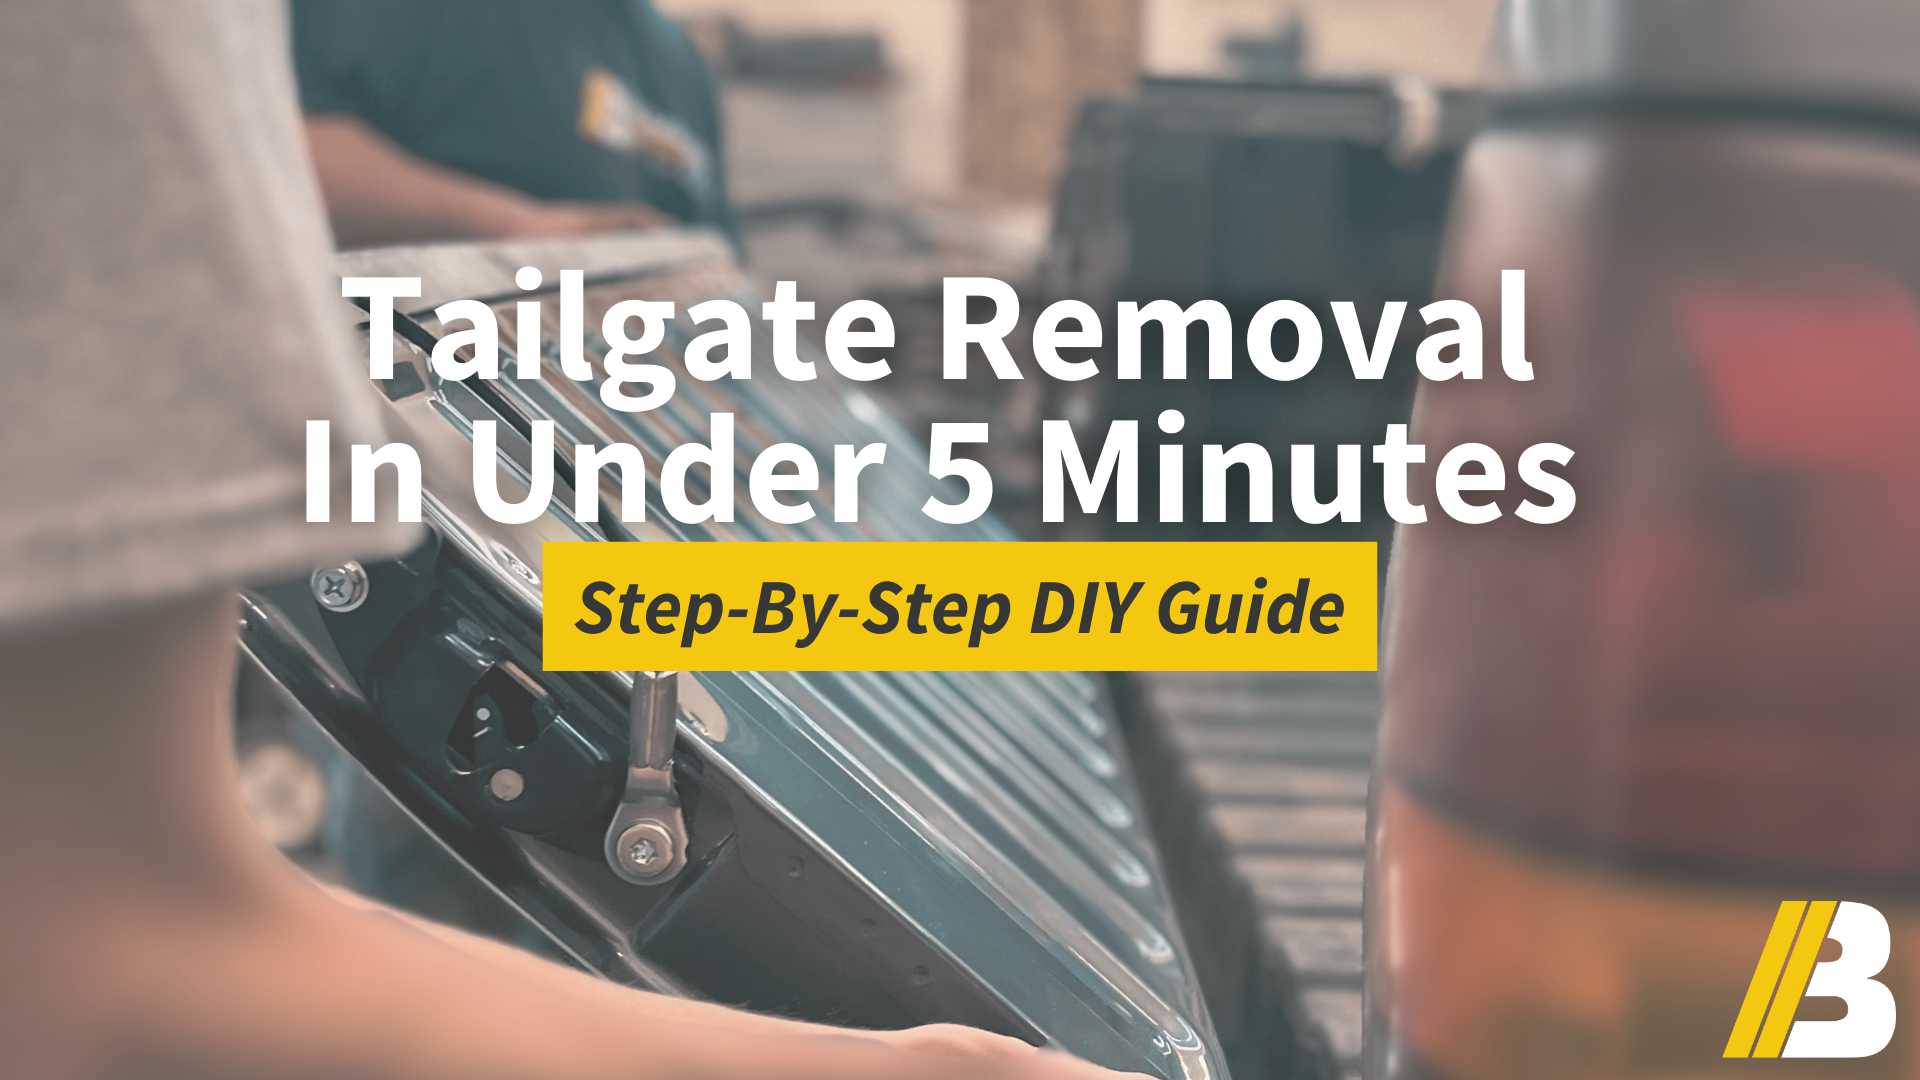 How To Remove Your Chevy Silverado Truck Tailgate In Under 5 Minutes!